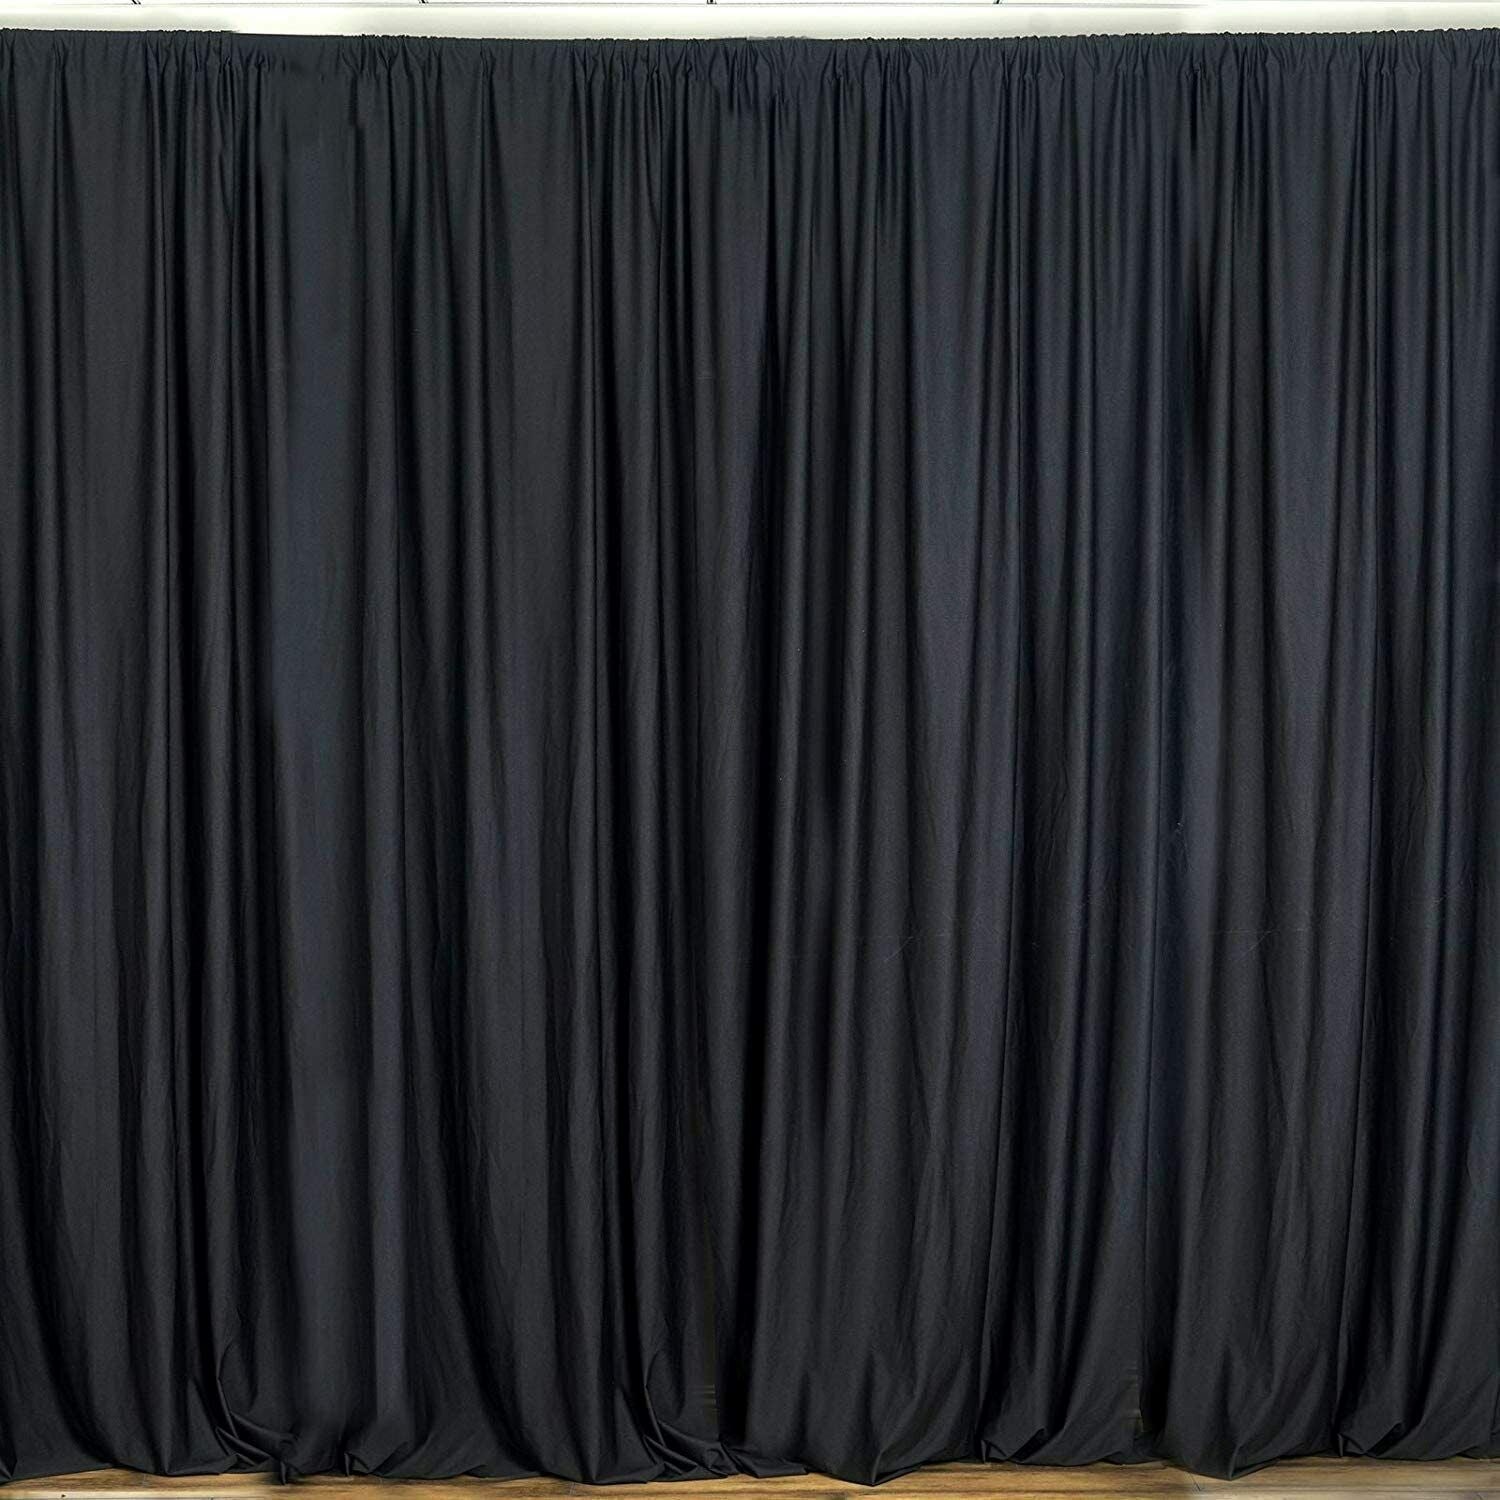 10 ft. Wide X 8 ft. Tall - Black - Curtain Polyester Backdrop High Qua ...